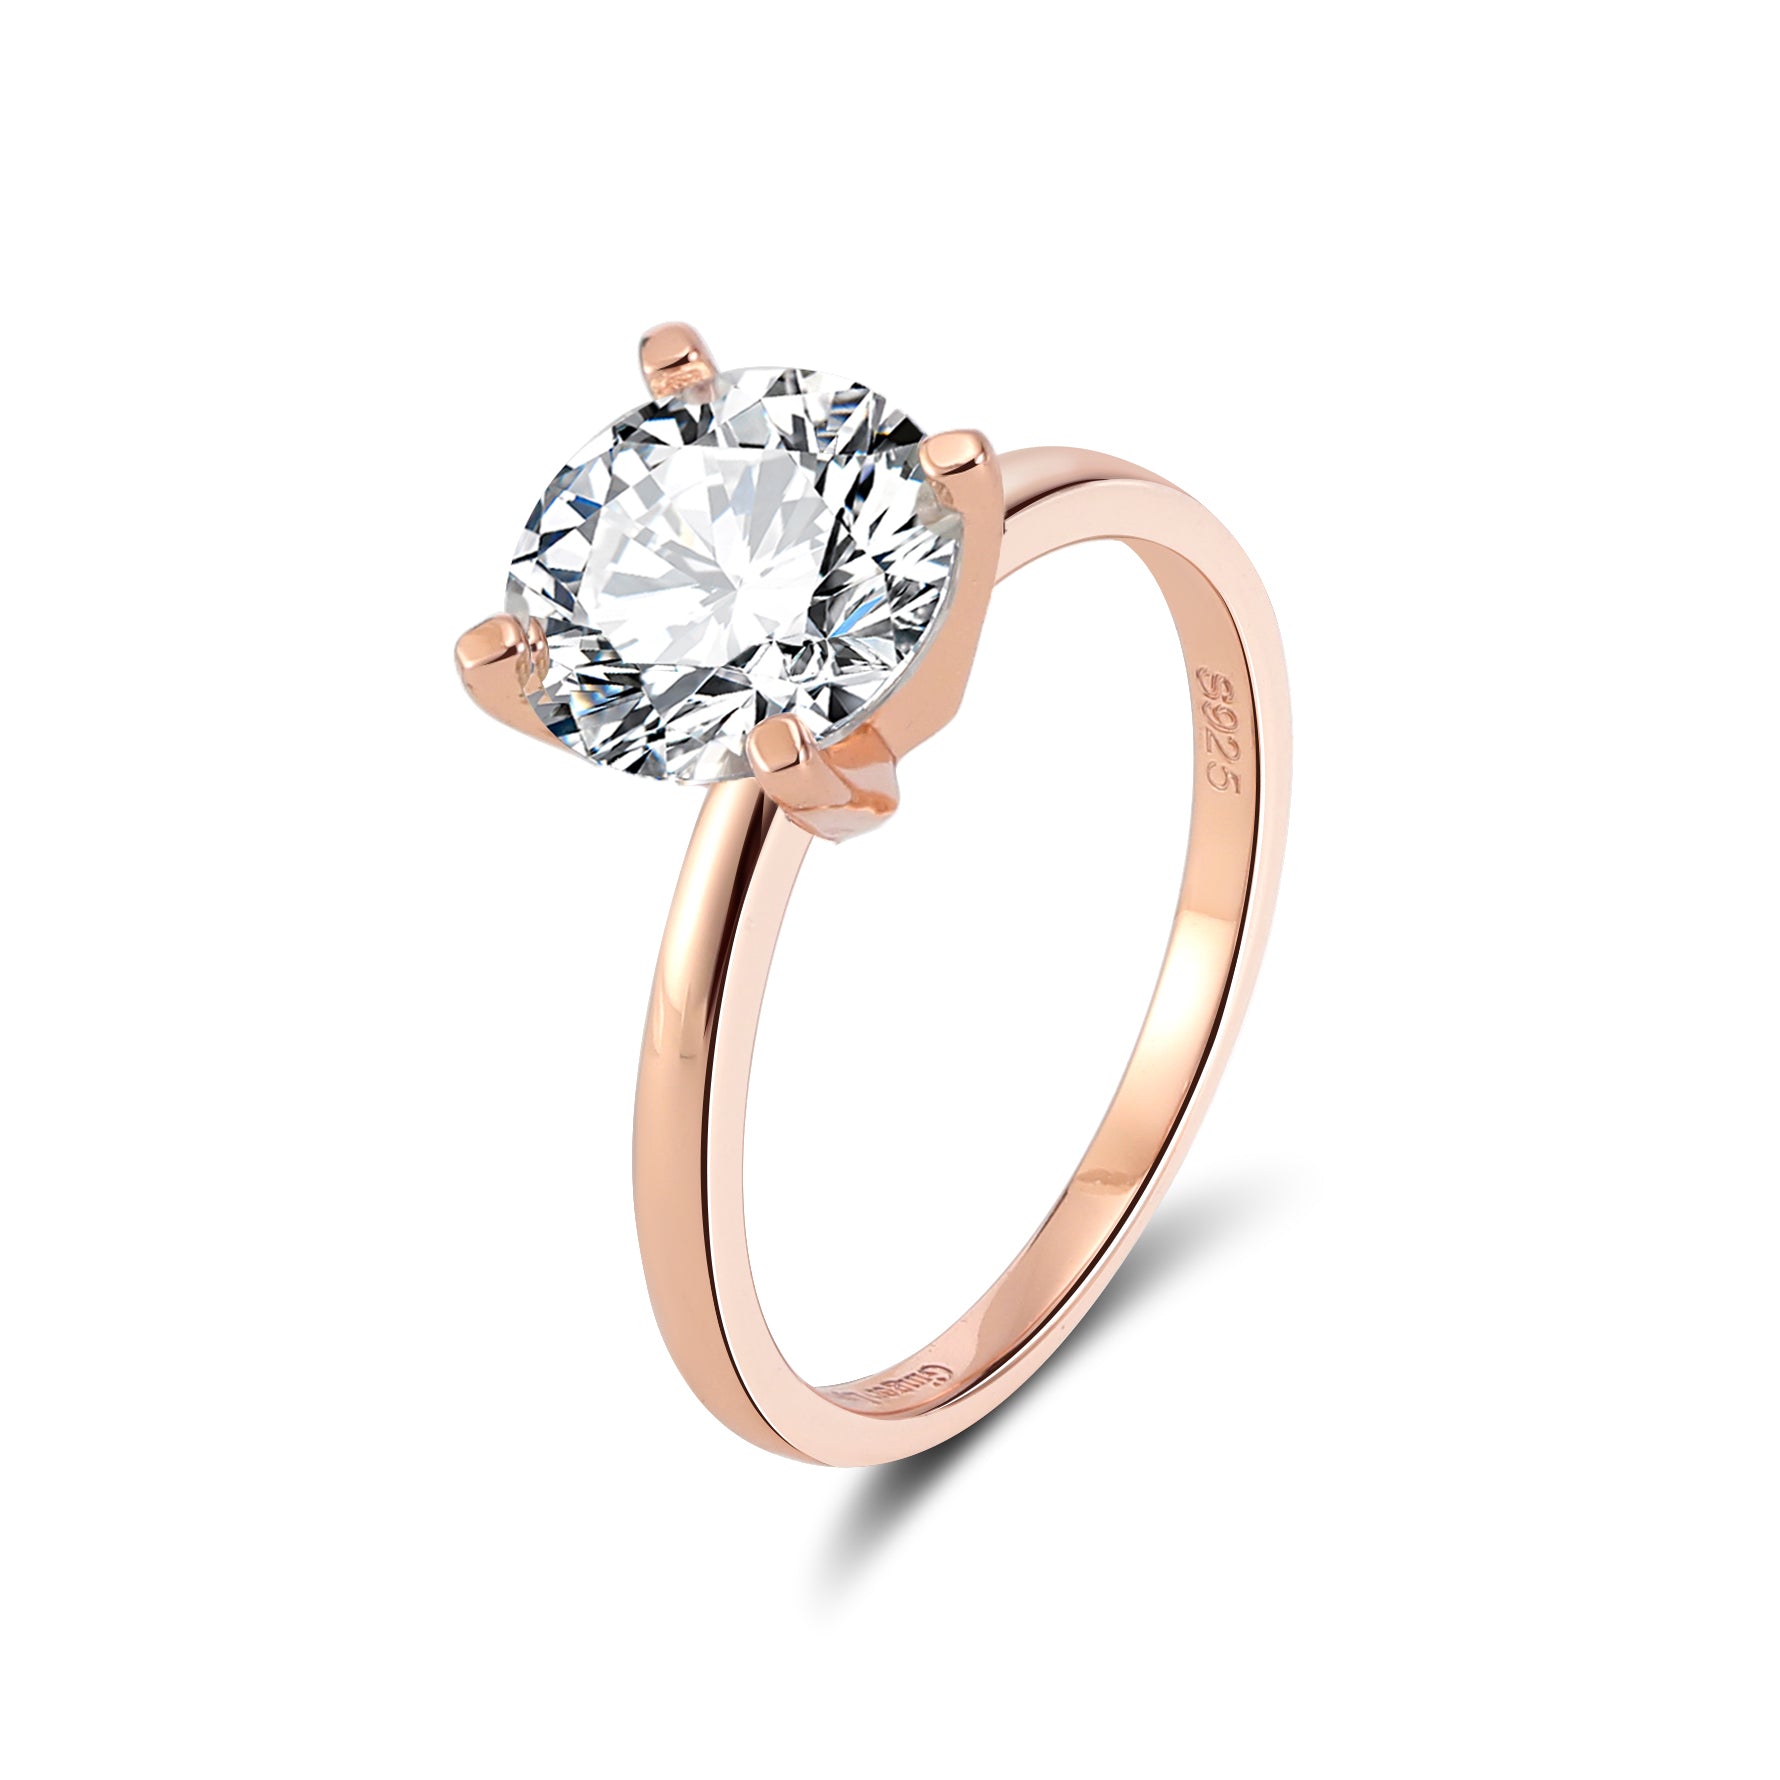 Amore Engagement Ring Women 1 Ct Moissanite Gold Sterling Ginger Lyne Collection - 1CT Gold over Silver,8